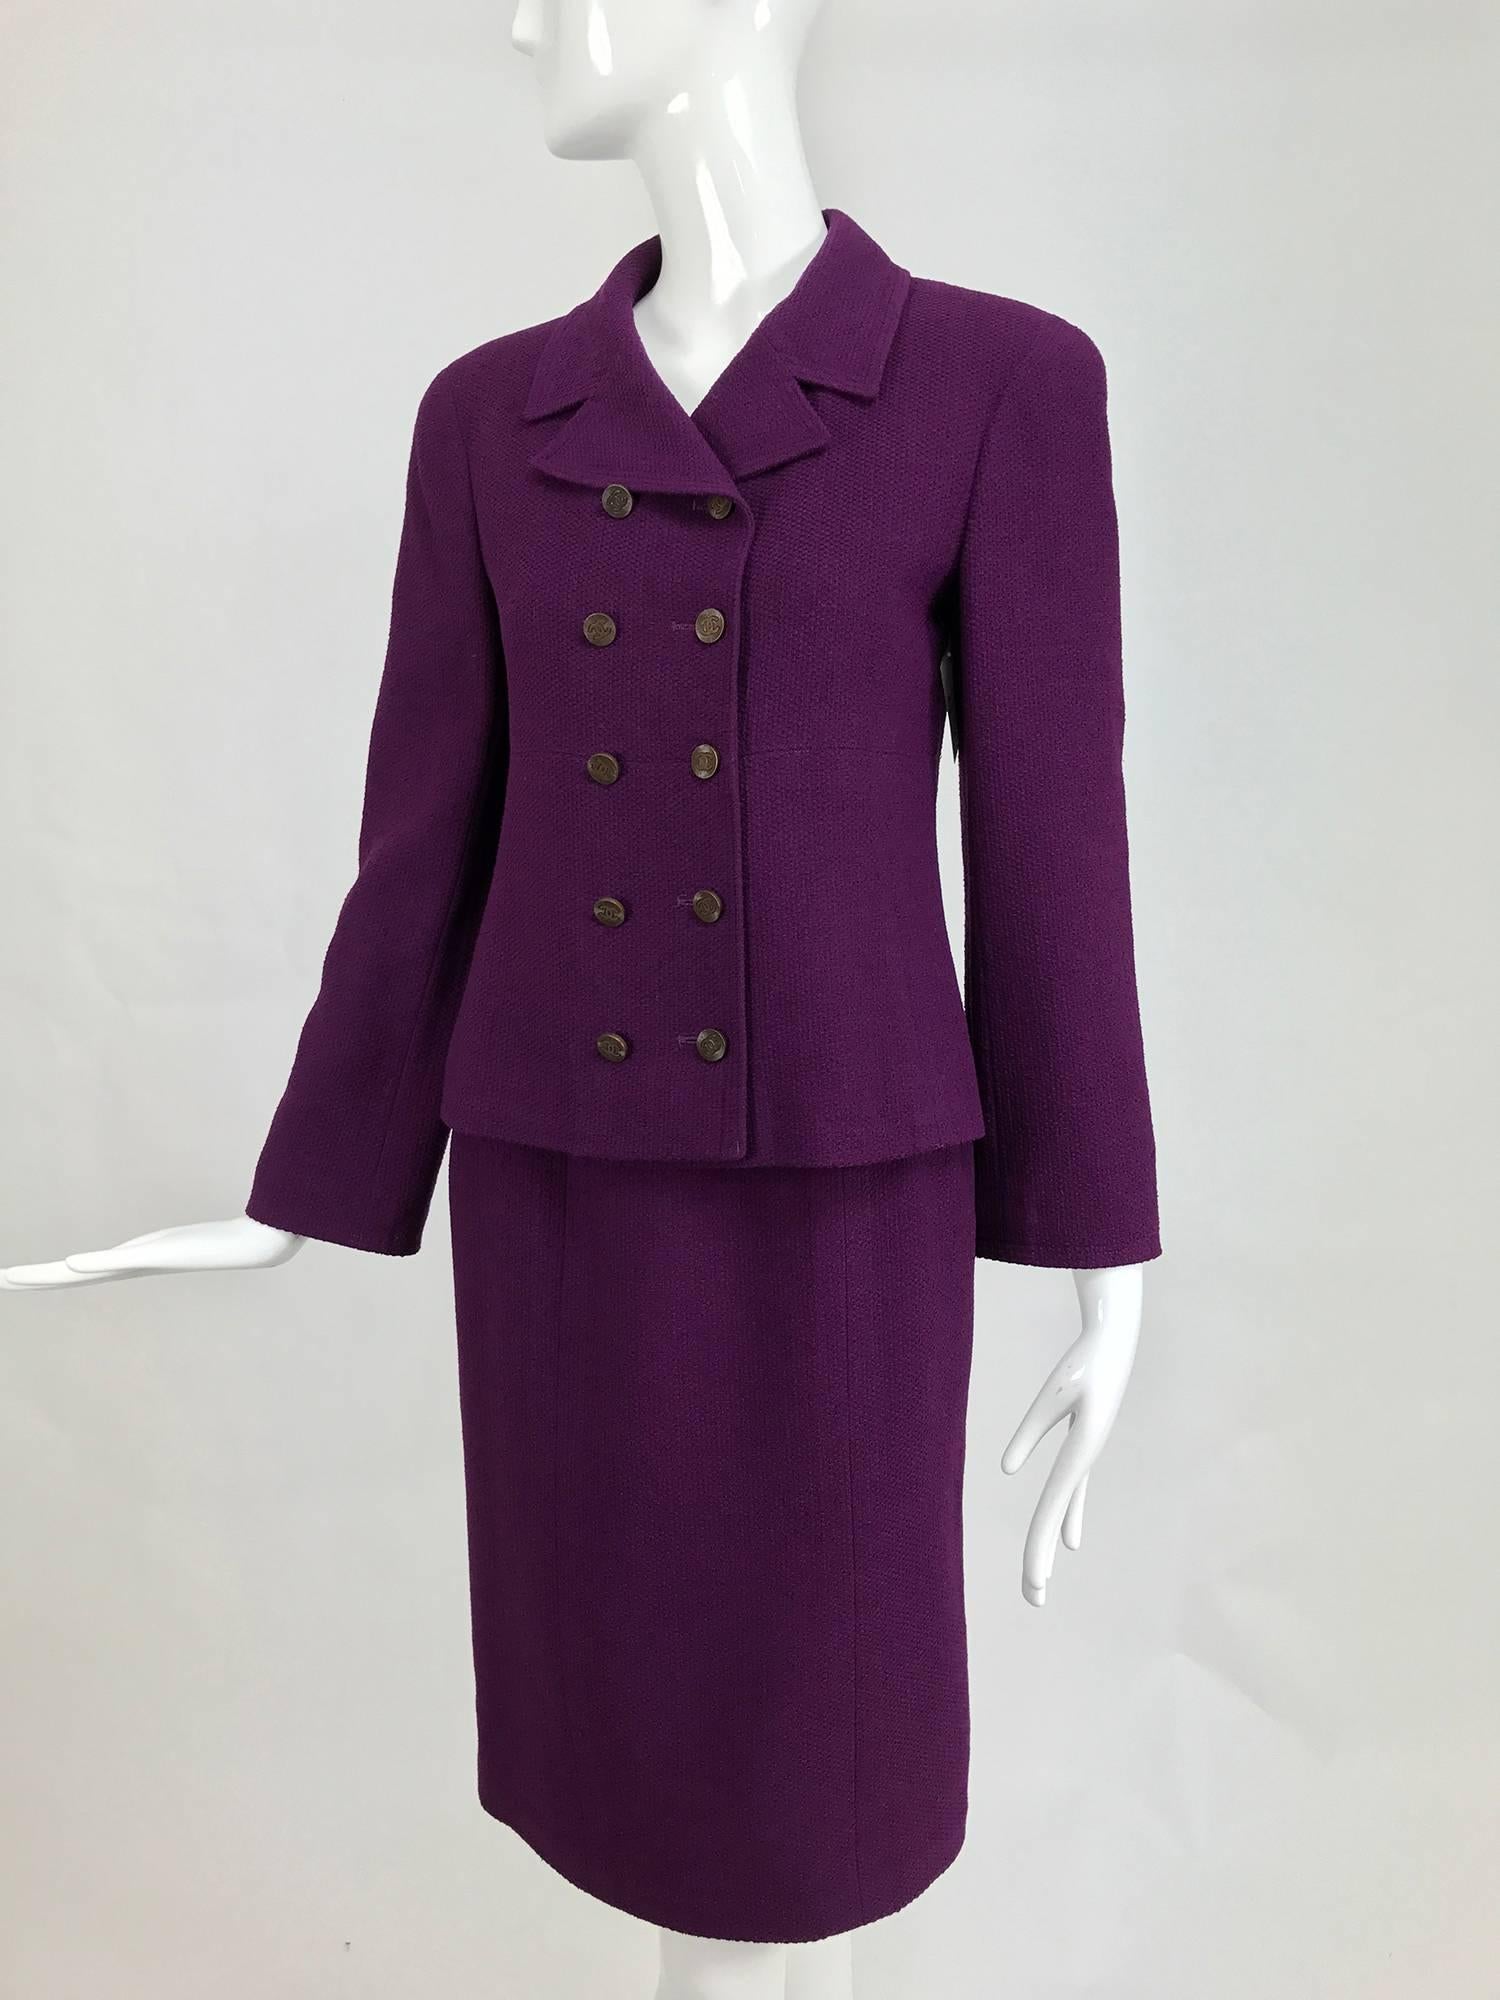 Chanel aubergine boucle classic double breasted skirt suit 1998A For Sale 1